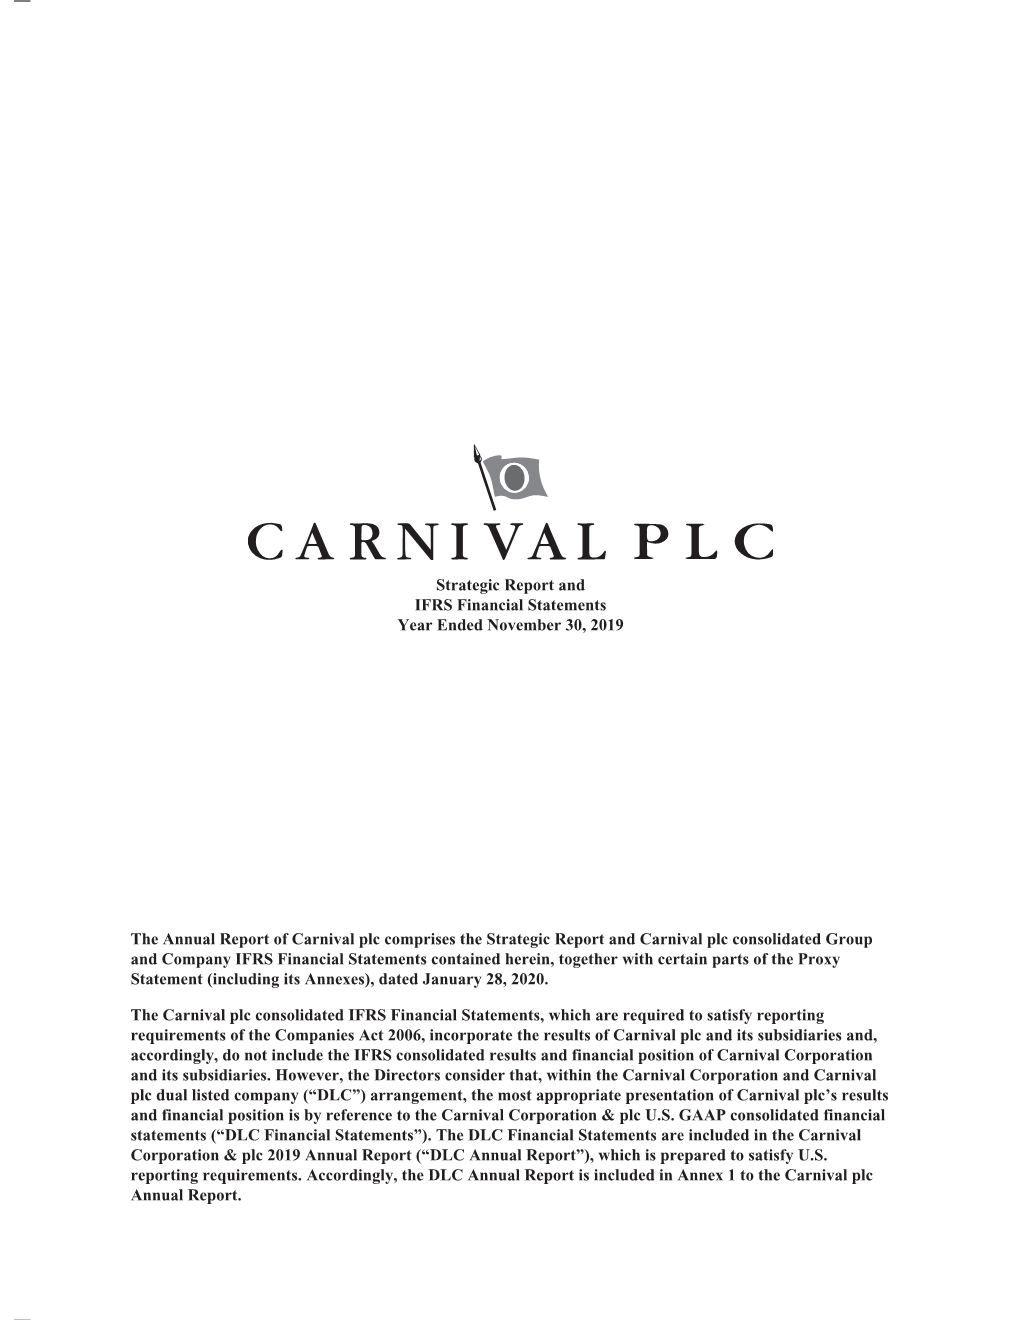 Carnival Plc 2019 Strategic Report and IFRS Financial Statements